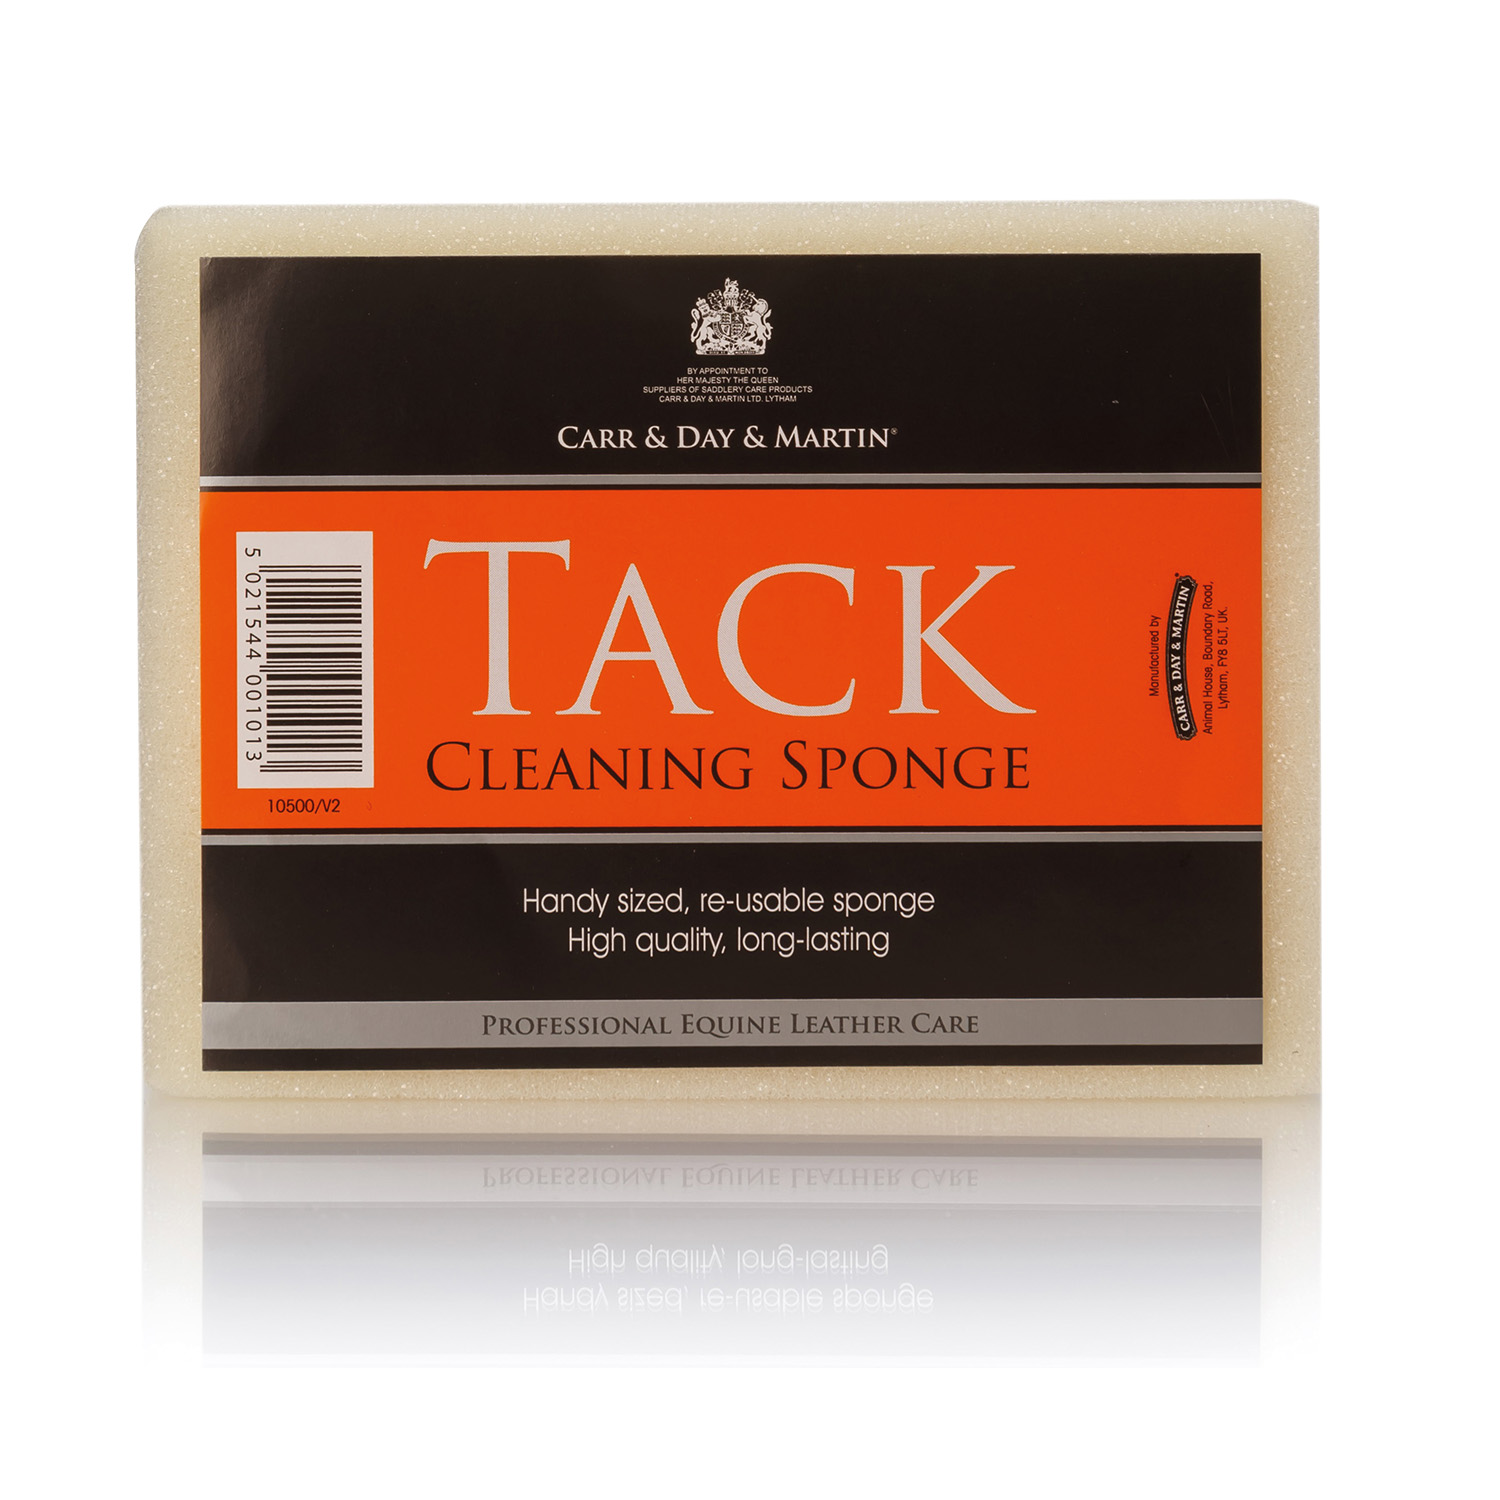 CARR & DAY & MARTIN TACK CLEANING SPONGE  EACH